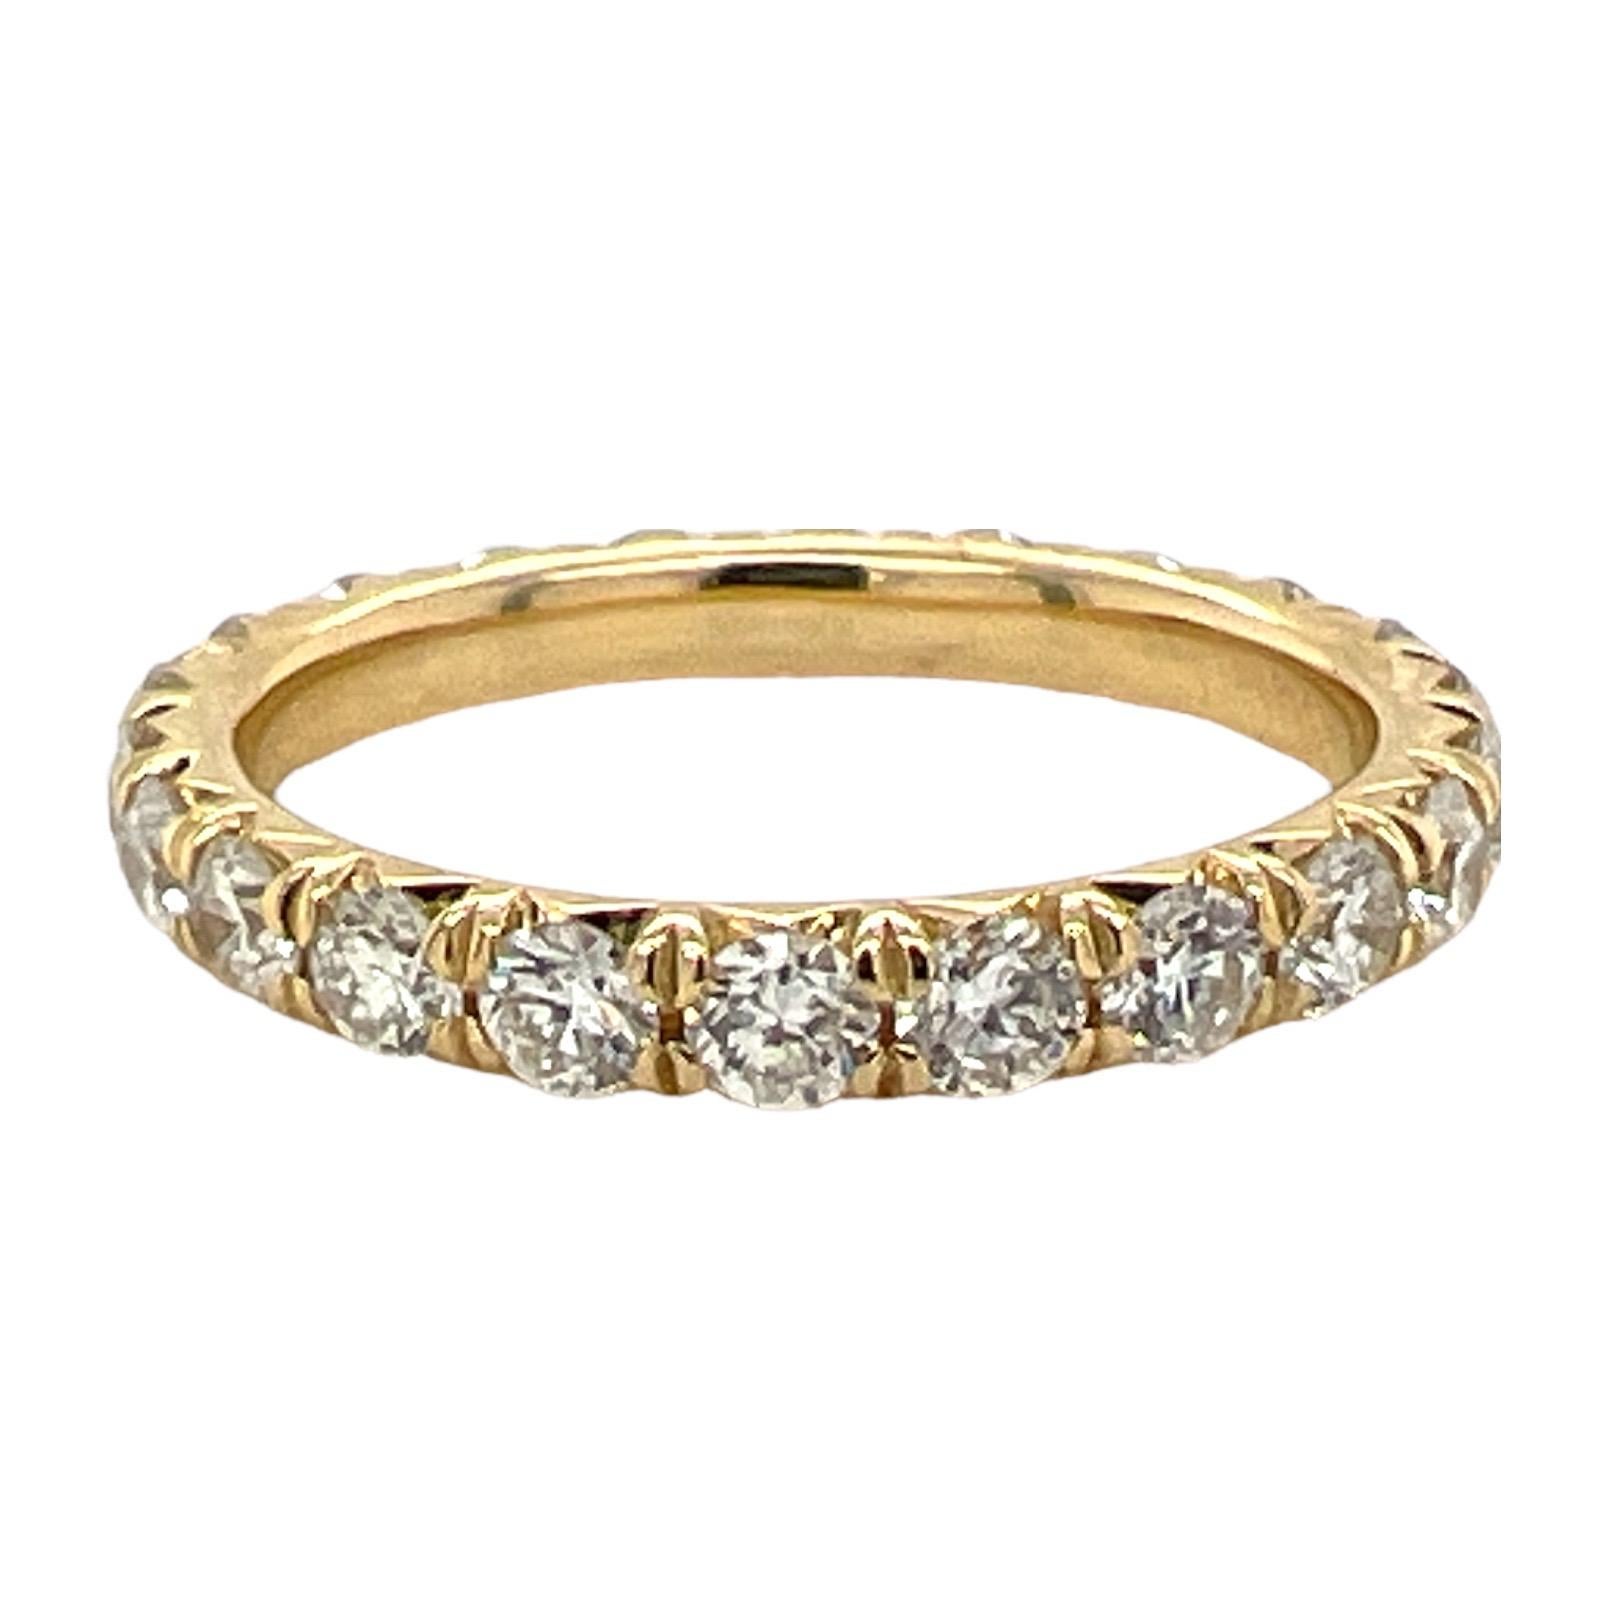 Diamond eternity band fashioned in 18 karat yellow gold . The band features round brilliant cut diamonds weighing 1.85 CTW and graded G-H color and SI clarity. The band is size 7 and measures 2.7 mm in width. 

